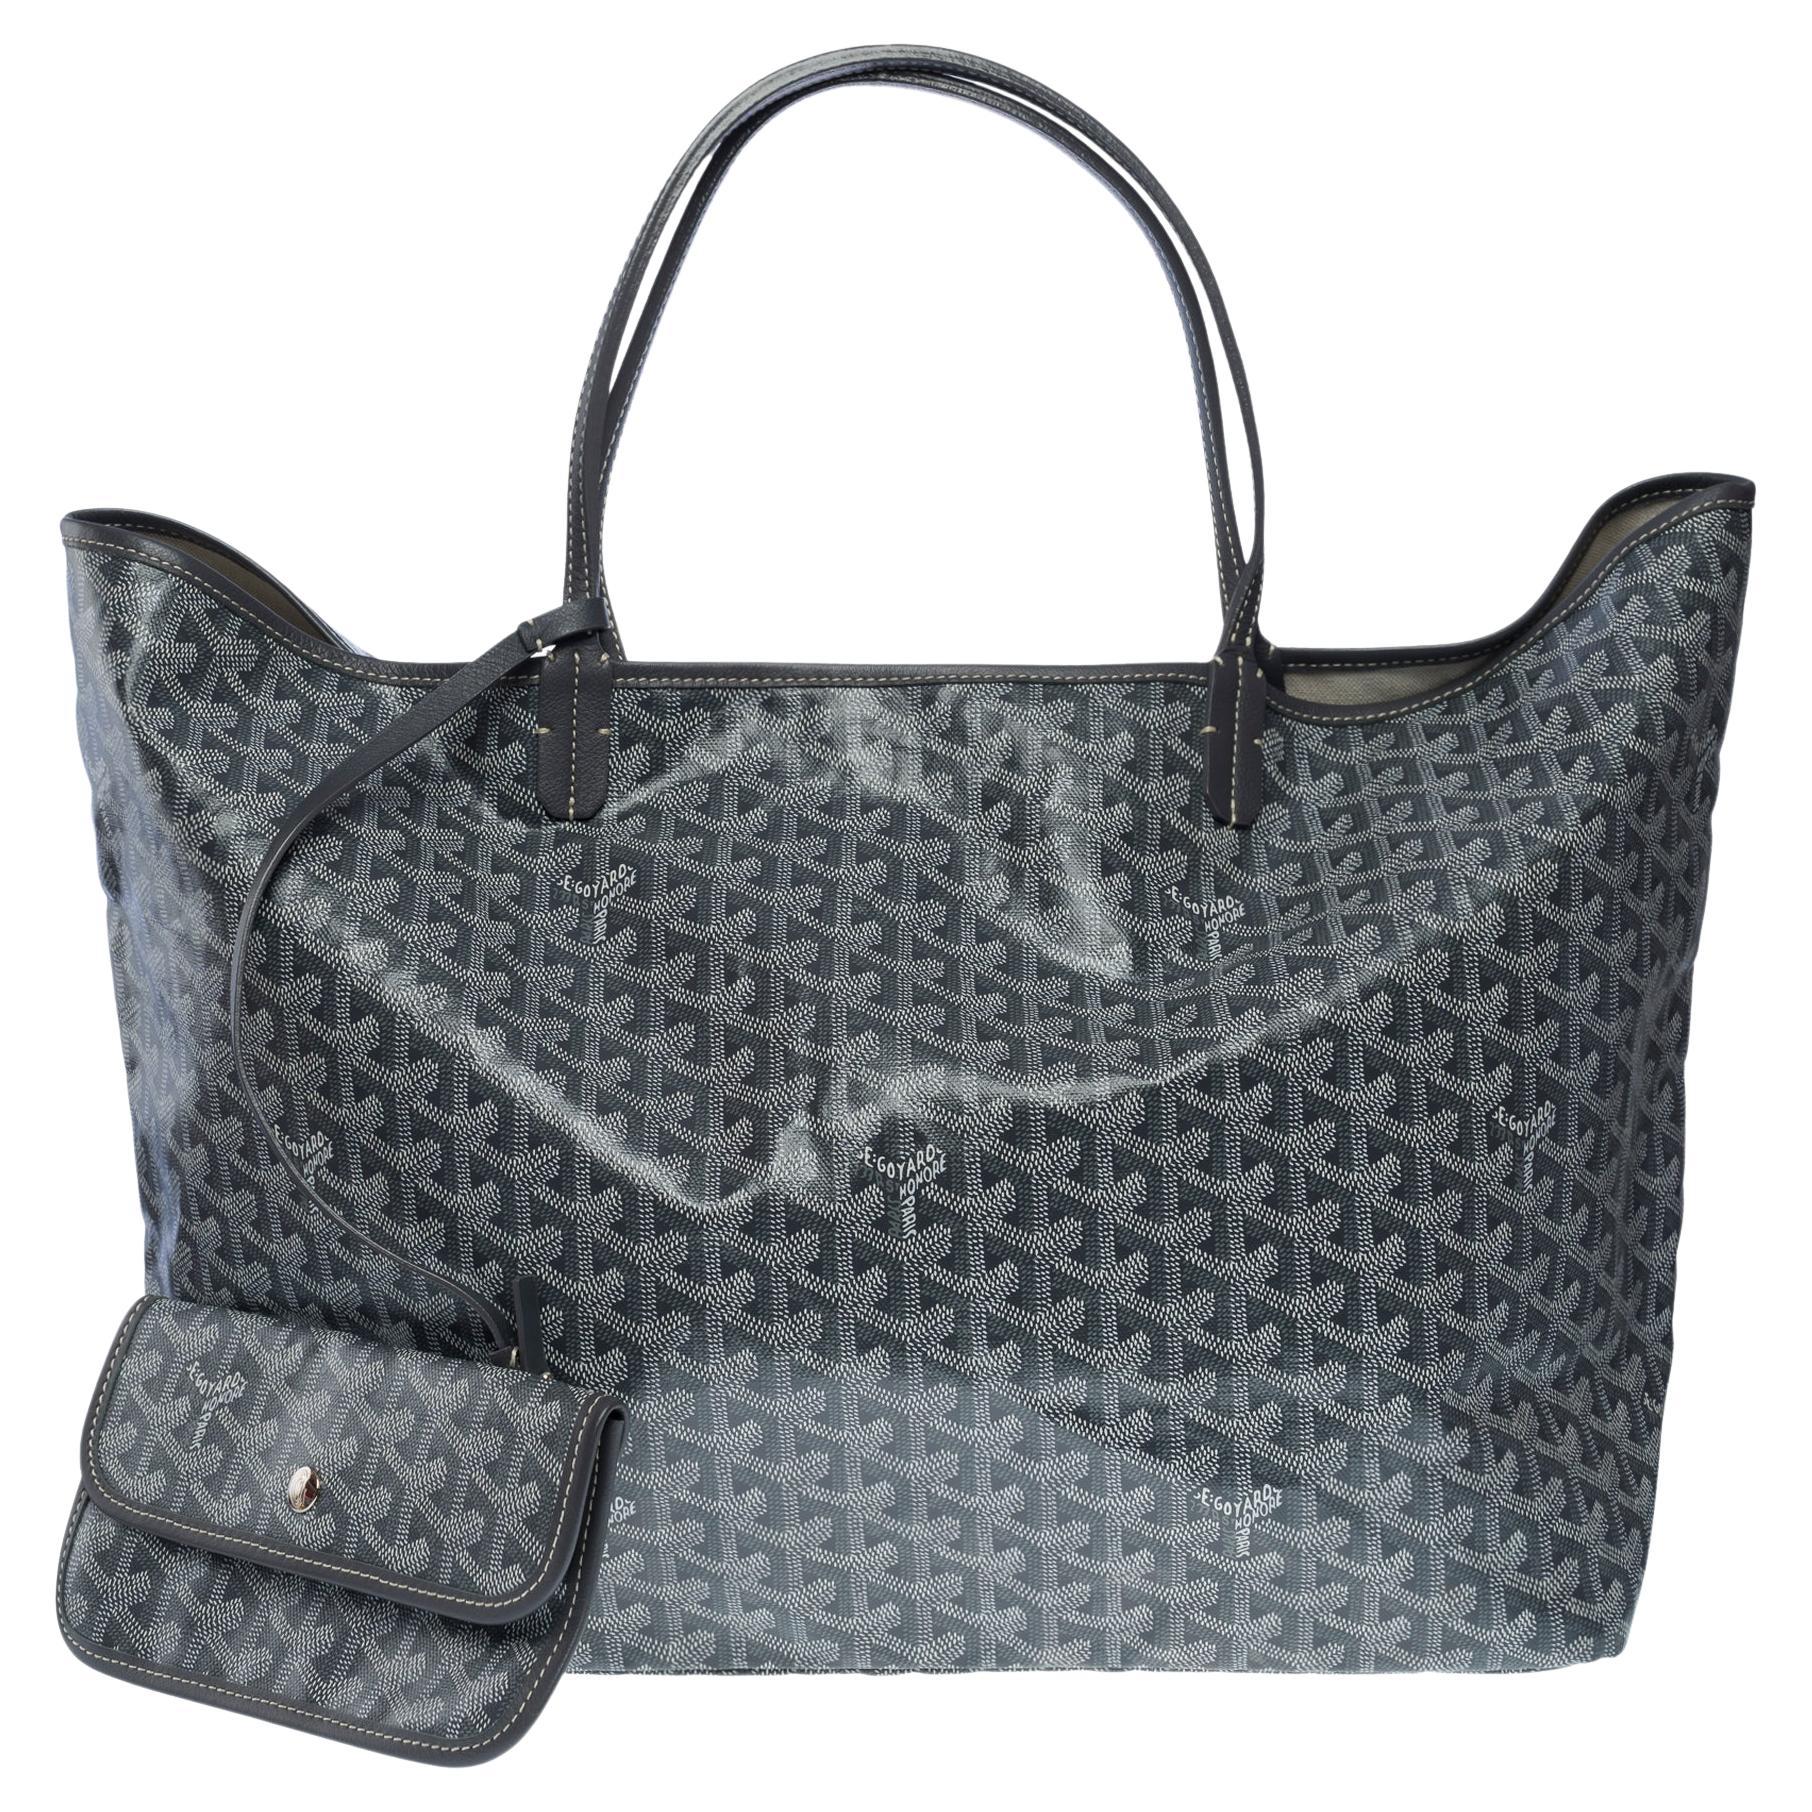 The Coveted Goyard Saint-Louis GM Tote Bag in Grey and White Canvas, SHW